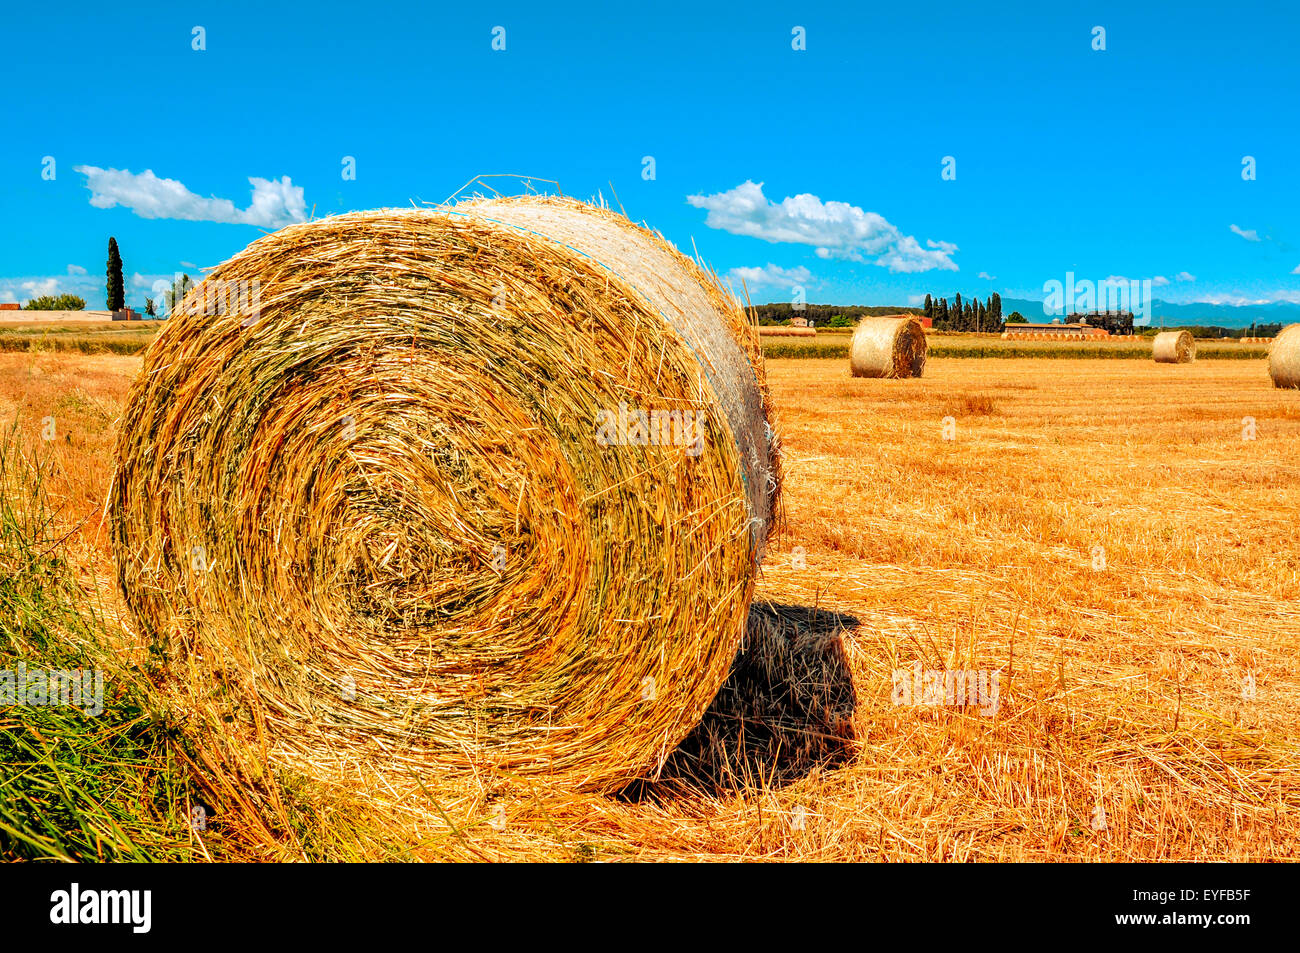 a crop field in Spain with some large round straw bales after harvesting Stock Photo